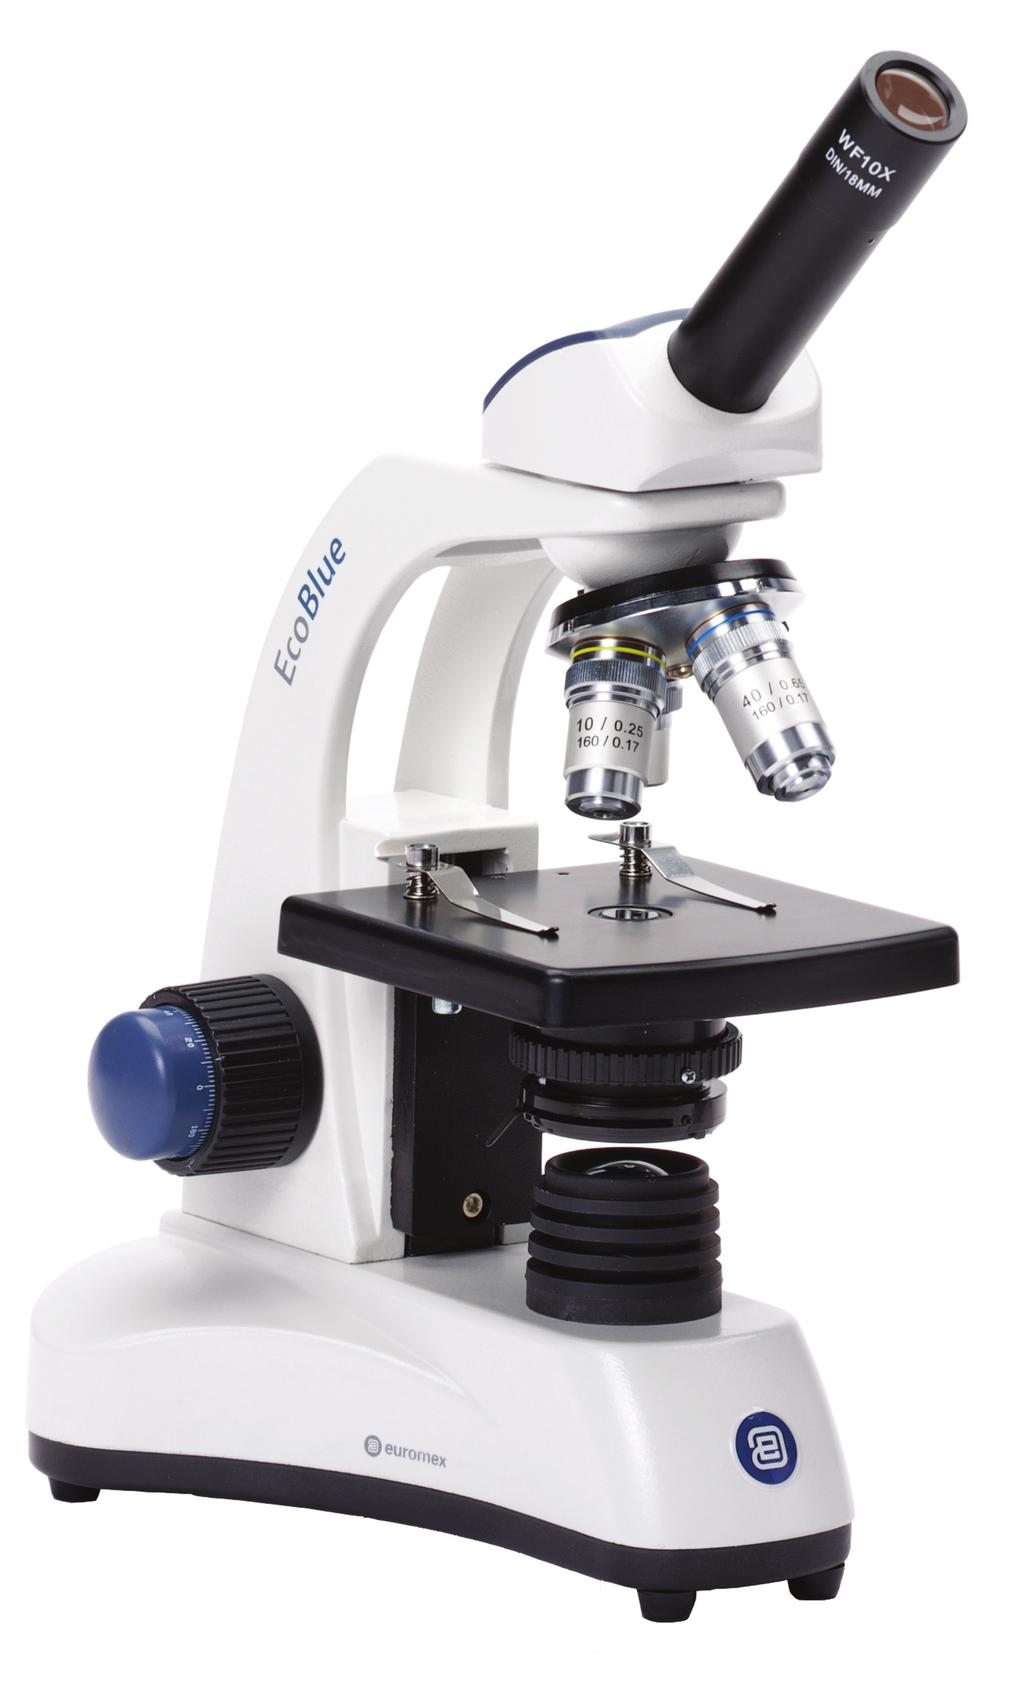 TM EDUCATION euromex optical technology EcoBlue F E AT U R E S Economical microscopes for education Monocular, binocular and trinocular models Digital and polarisation models available LED and